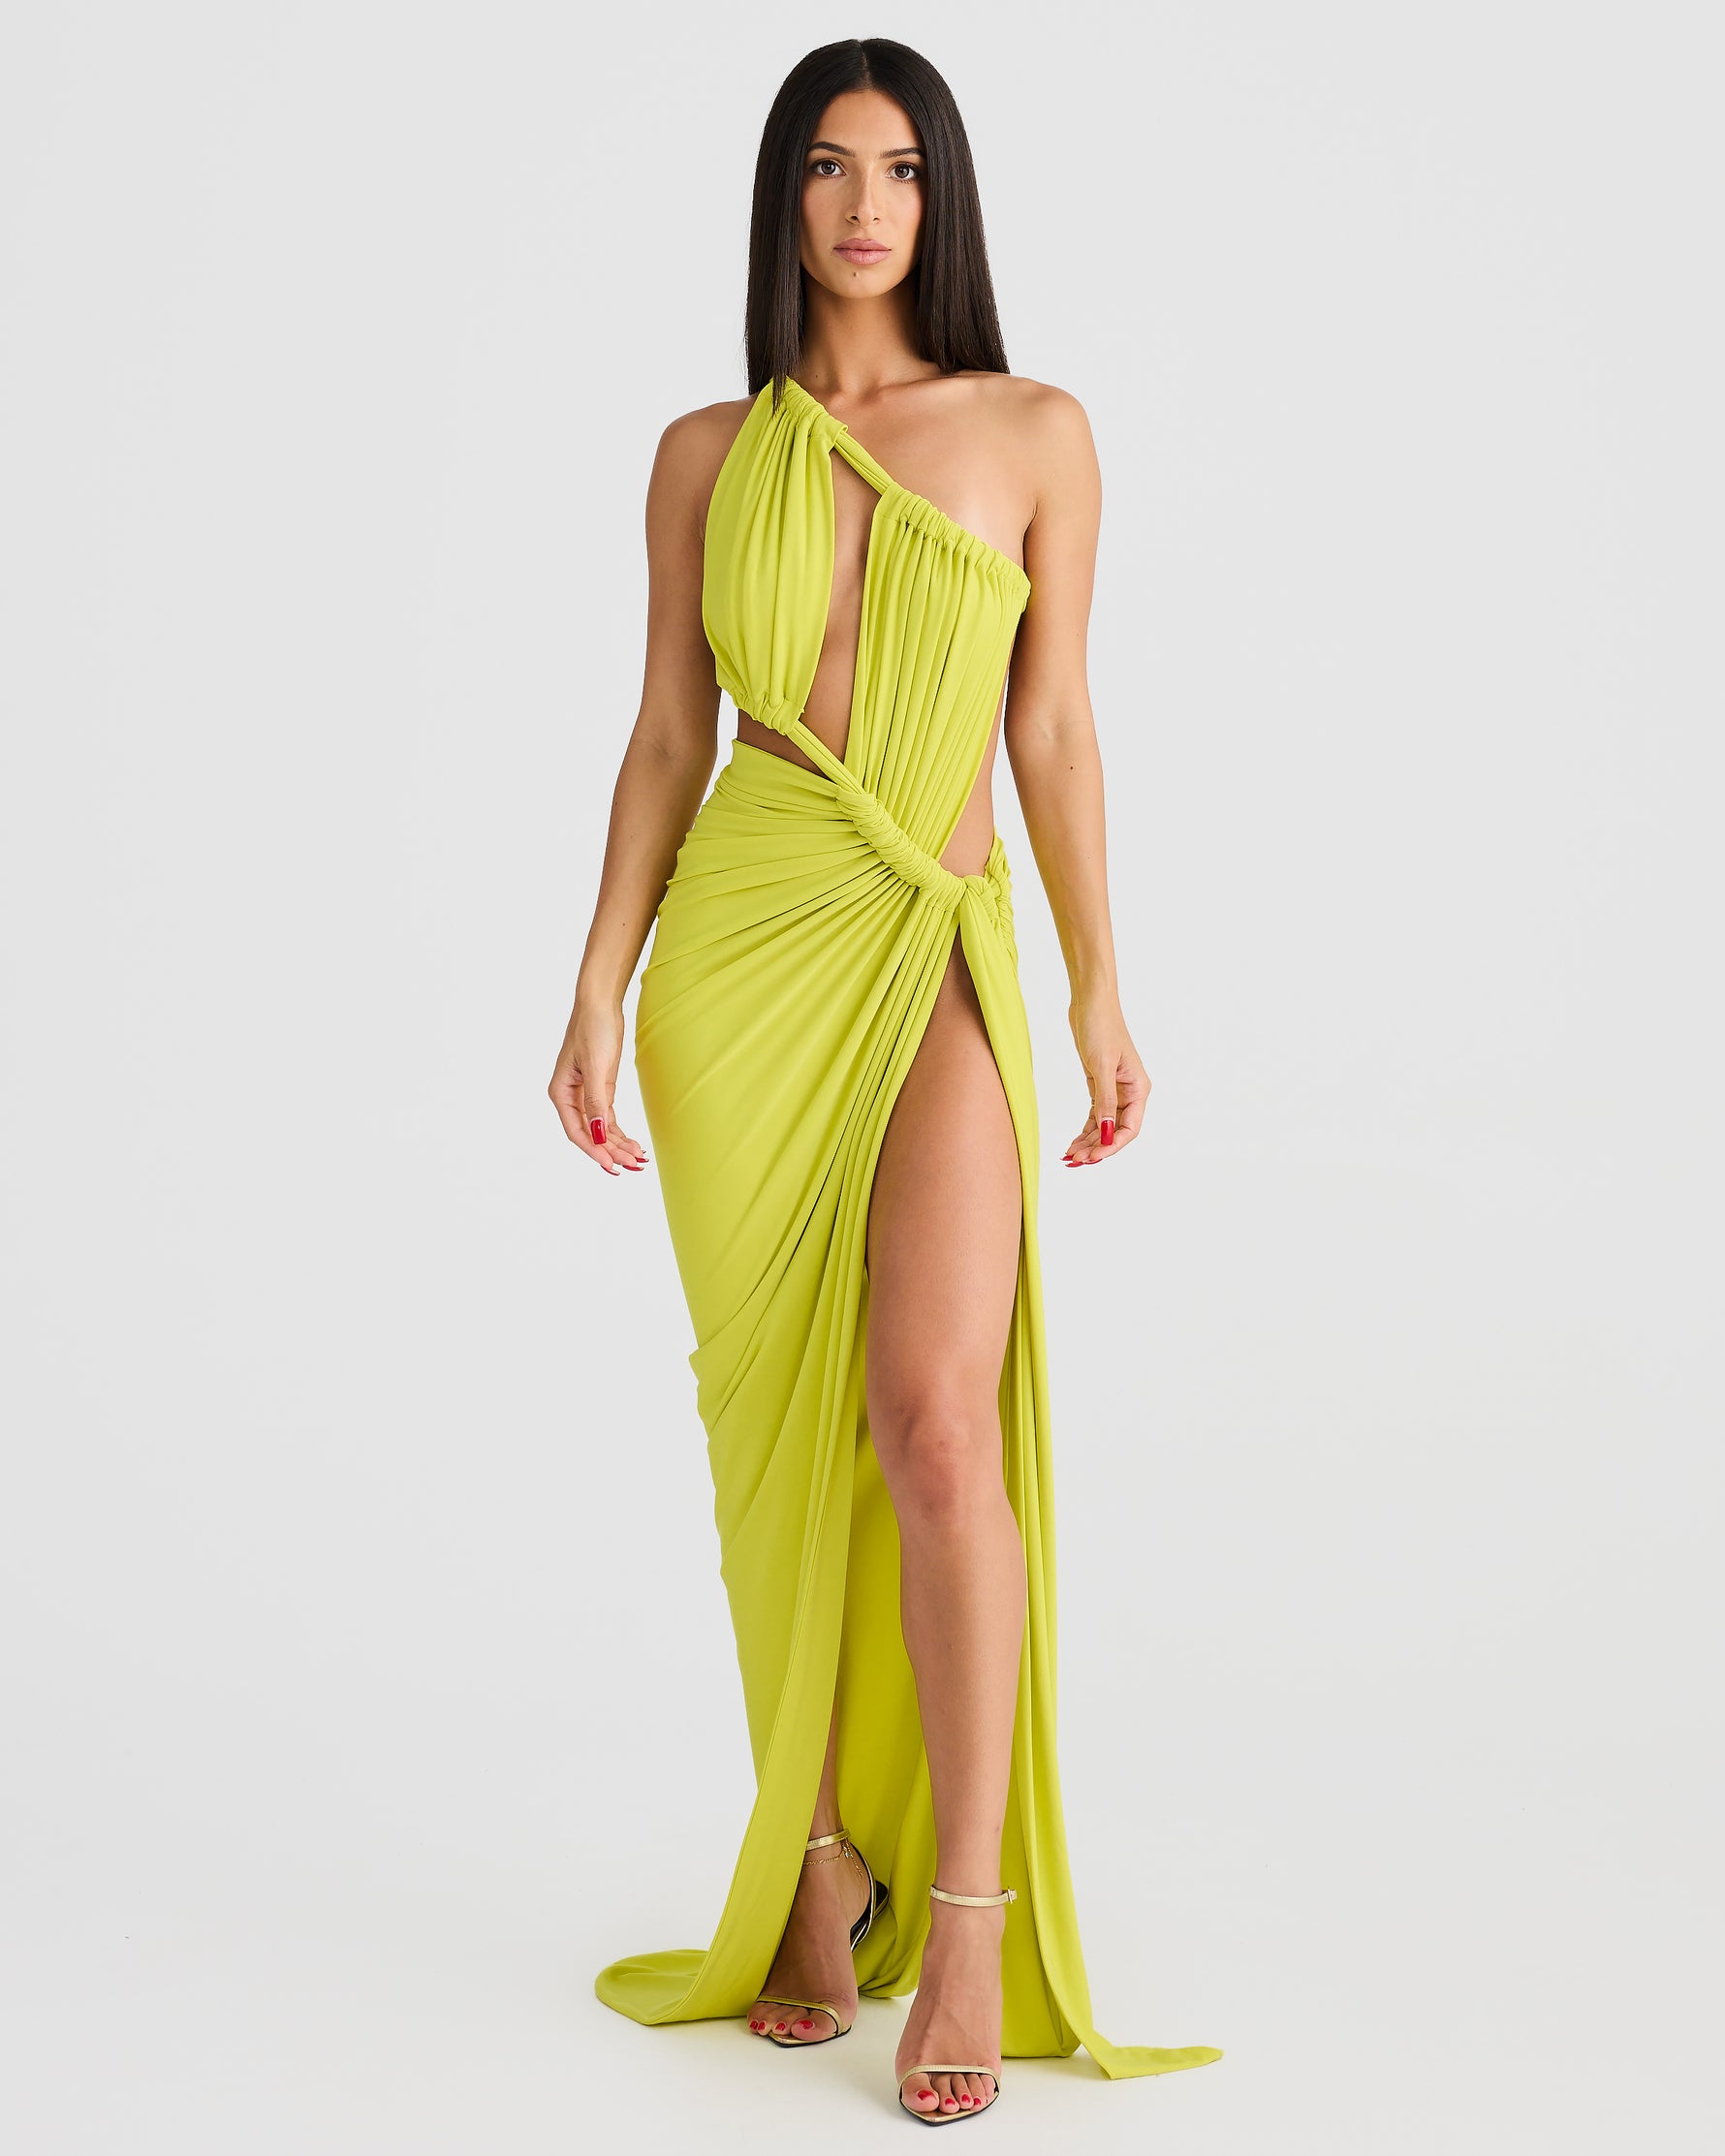 APHRODITE GOWN - CHARTREUSE